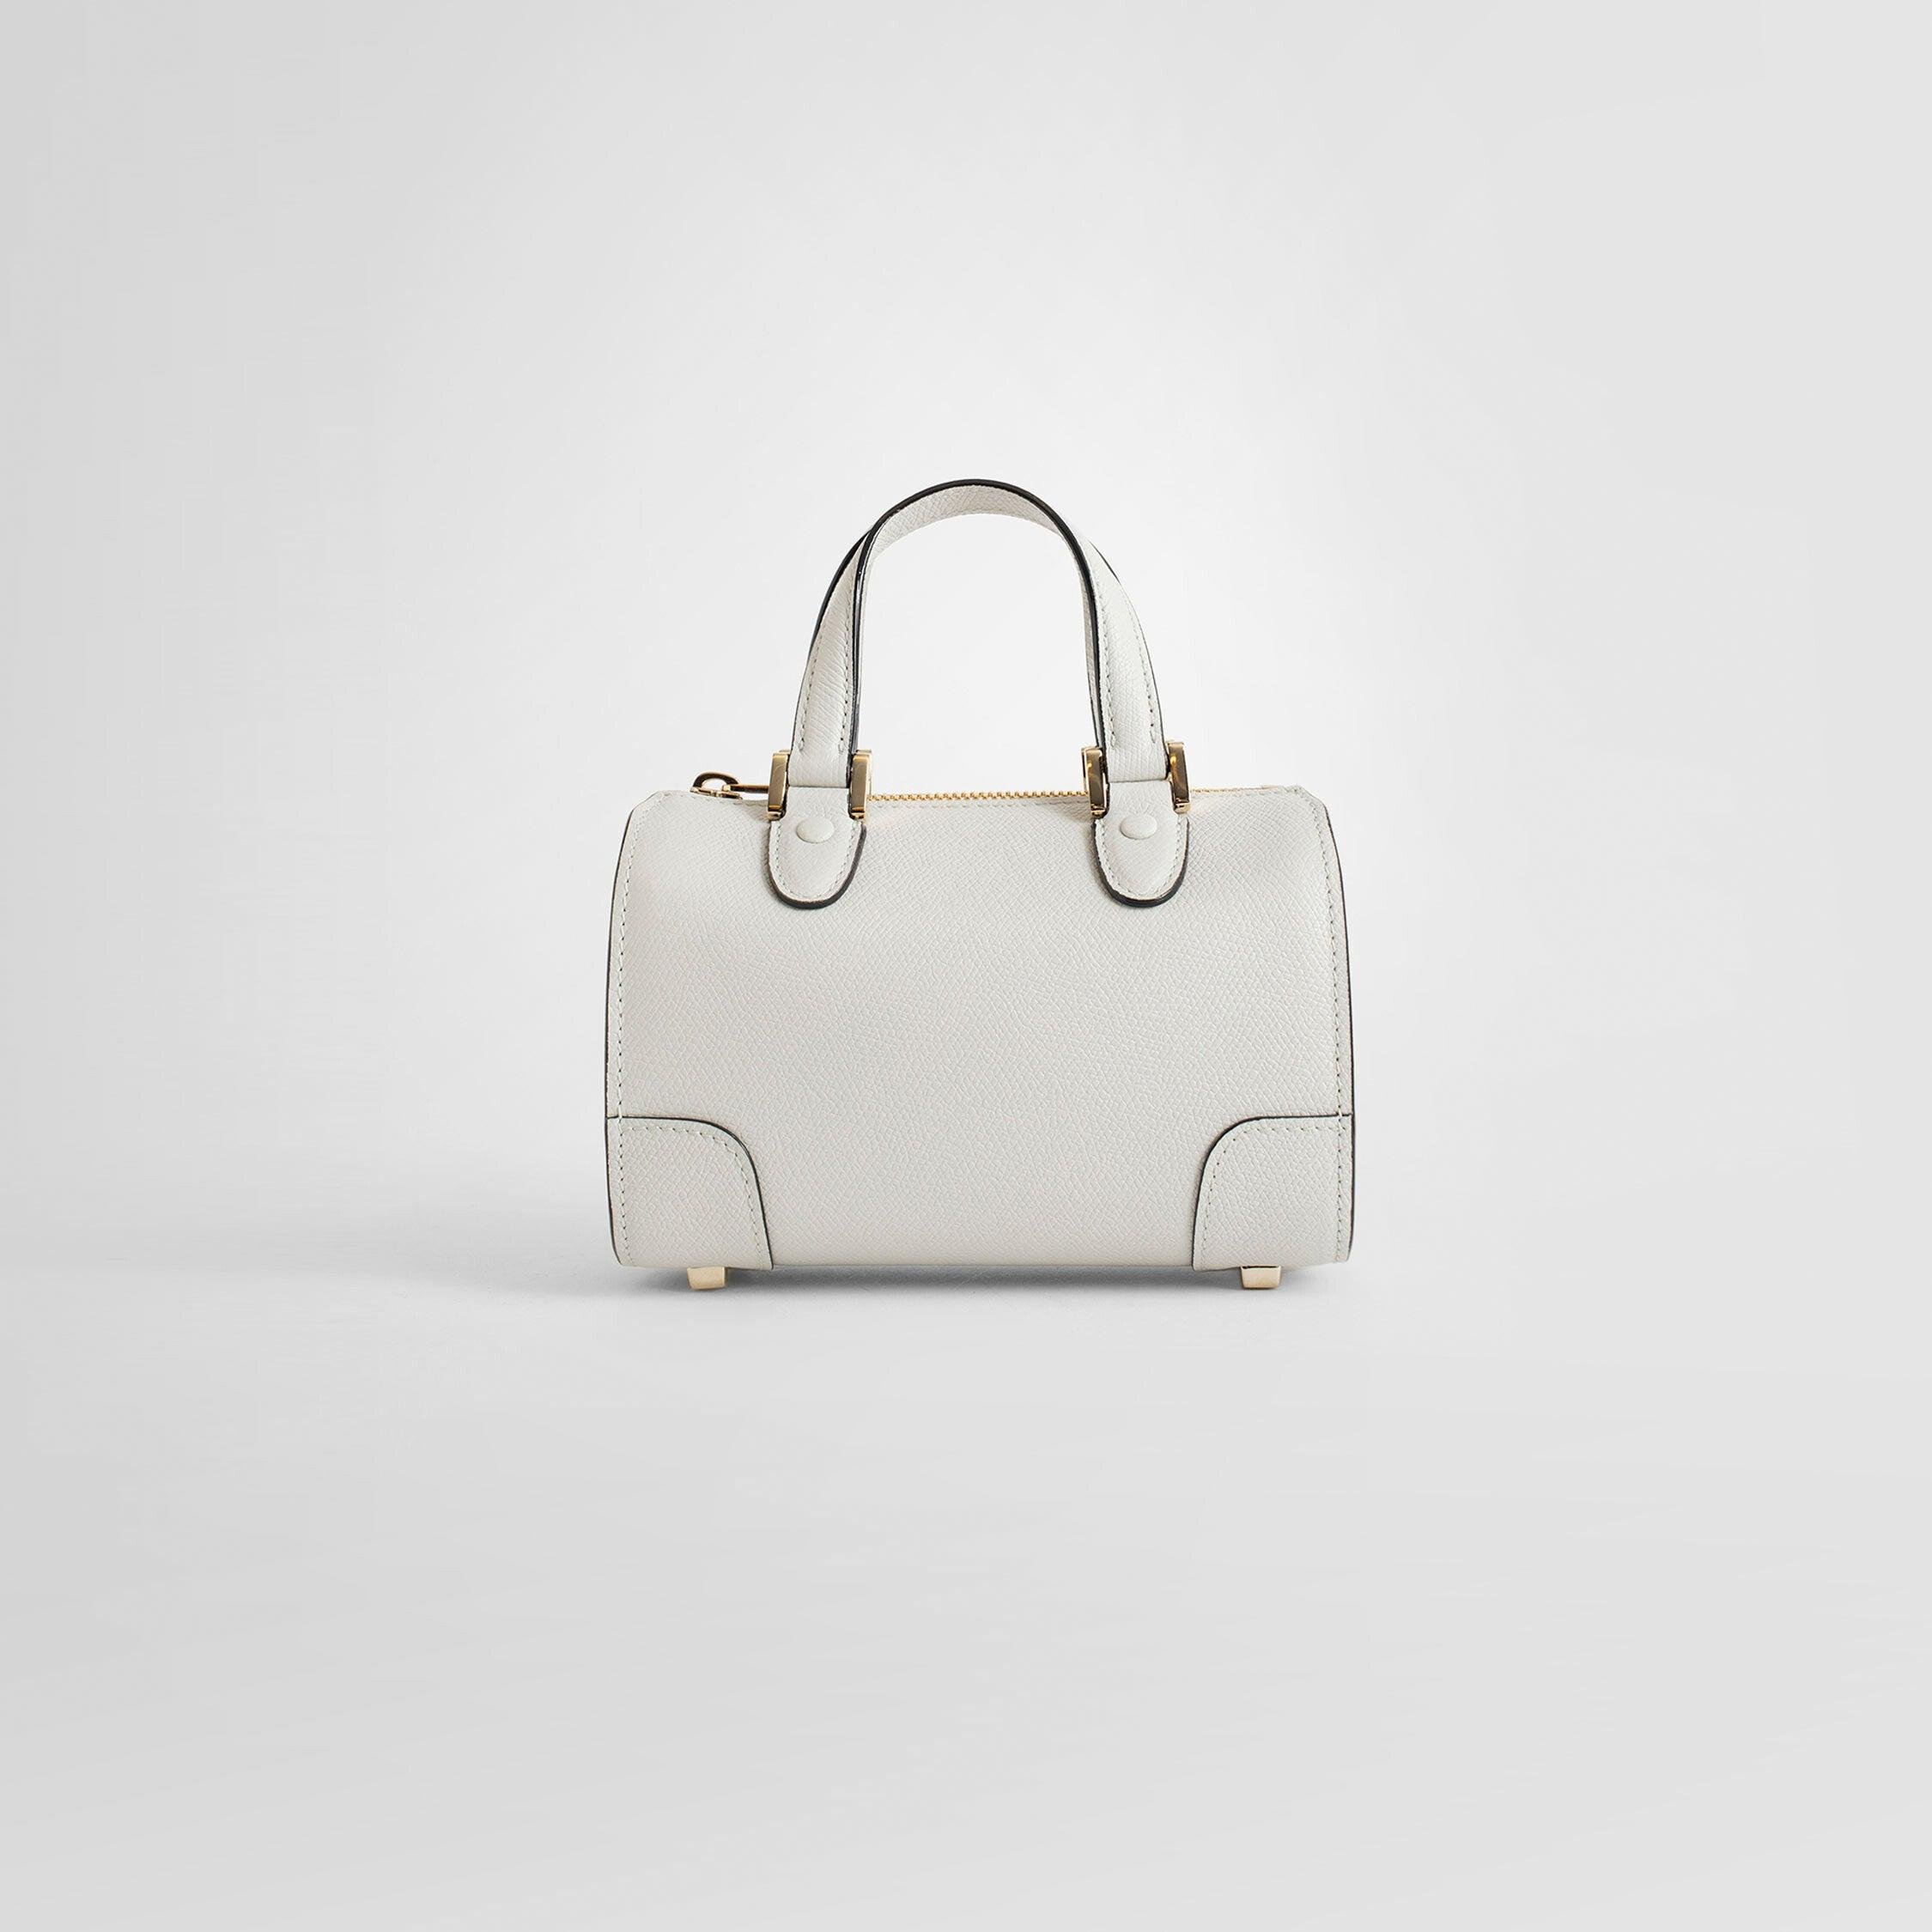 VALEXTRA WOMAN OFF-WHITE TOP HANDLE BAGS by VALEXTRA